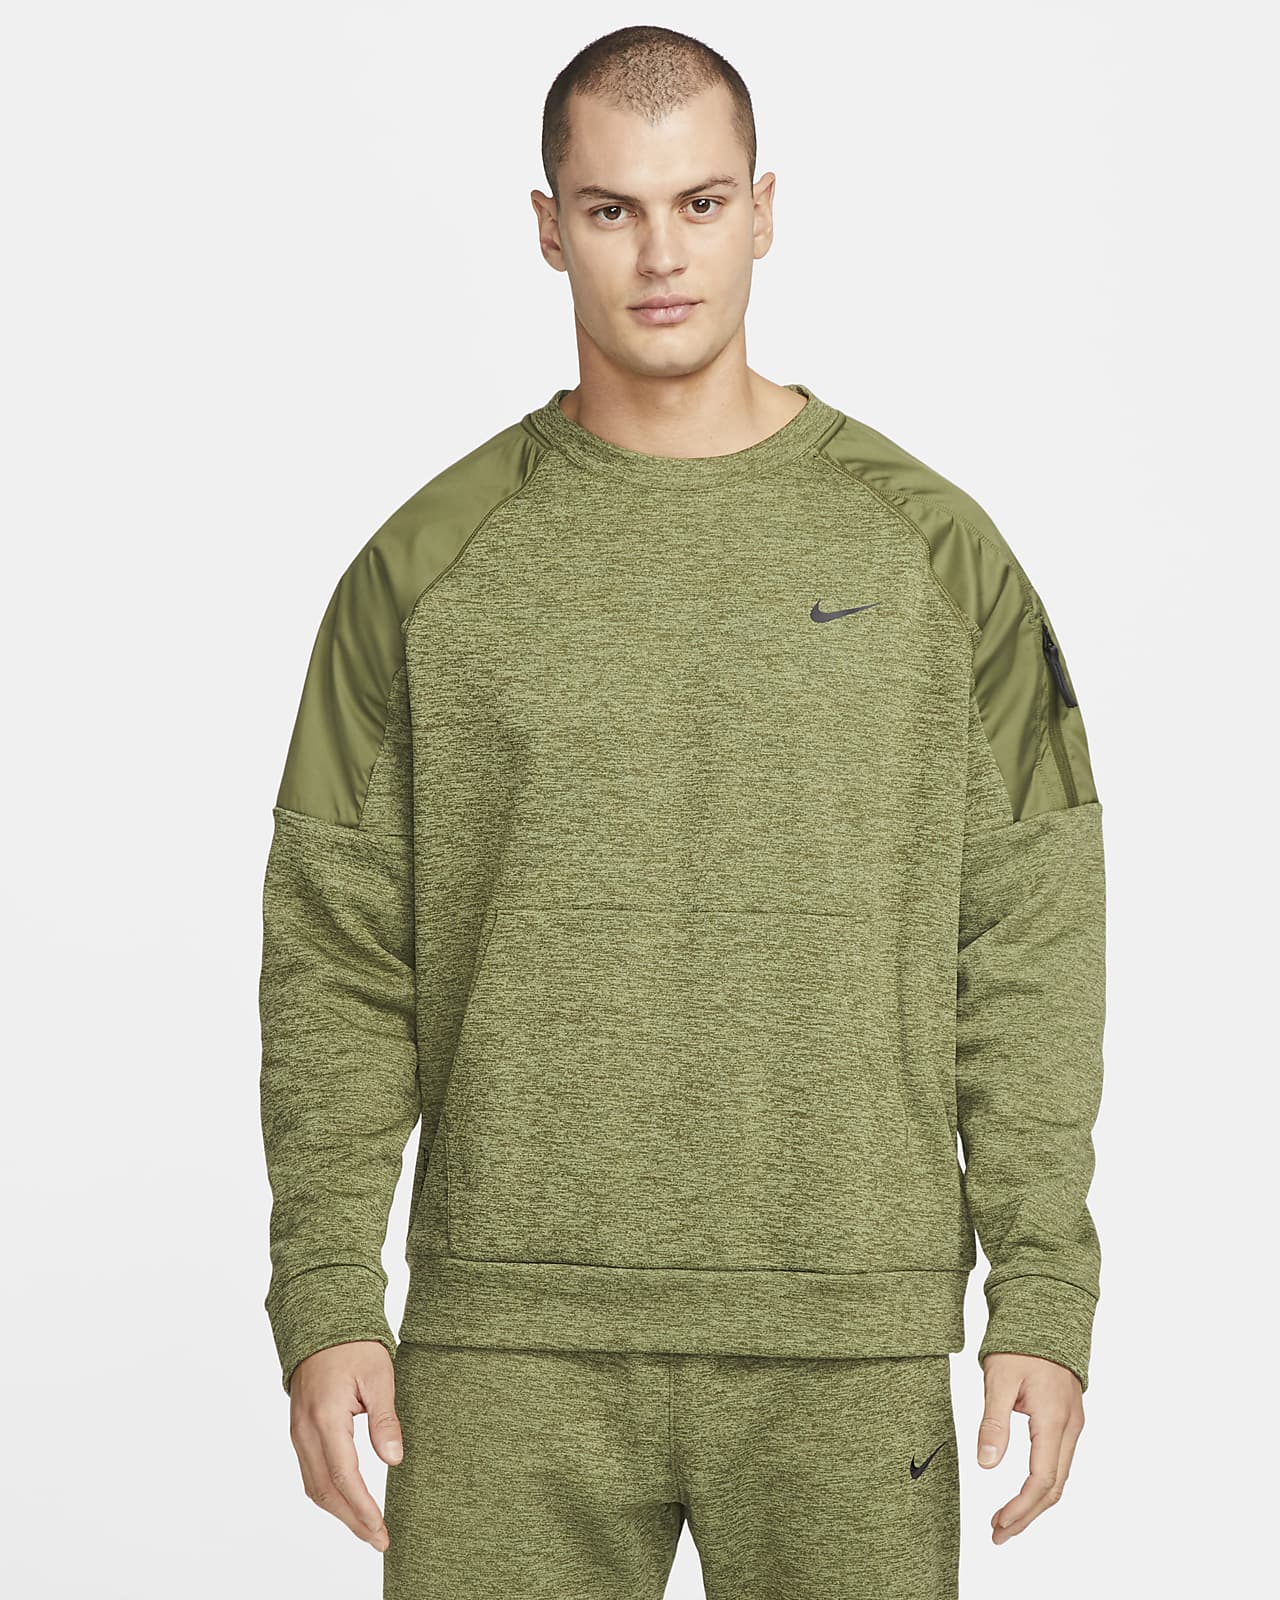 Nike Therma-FIT Men's Fitness Crew